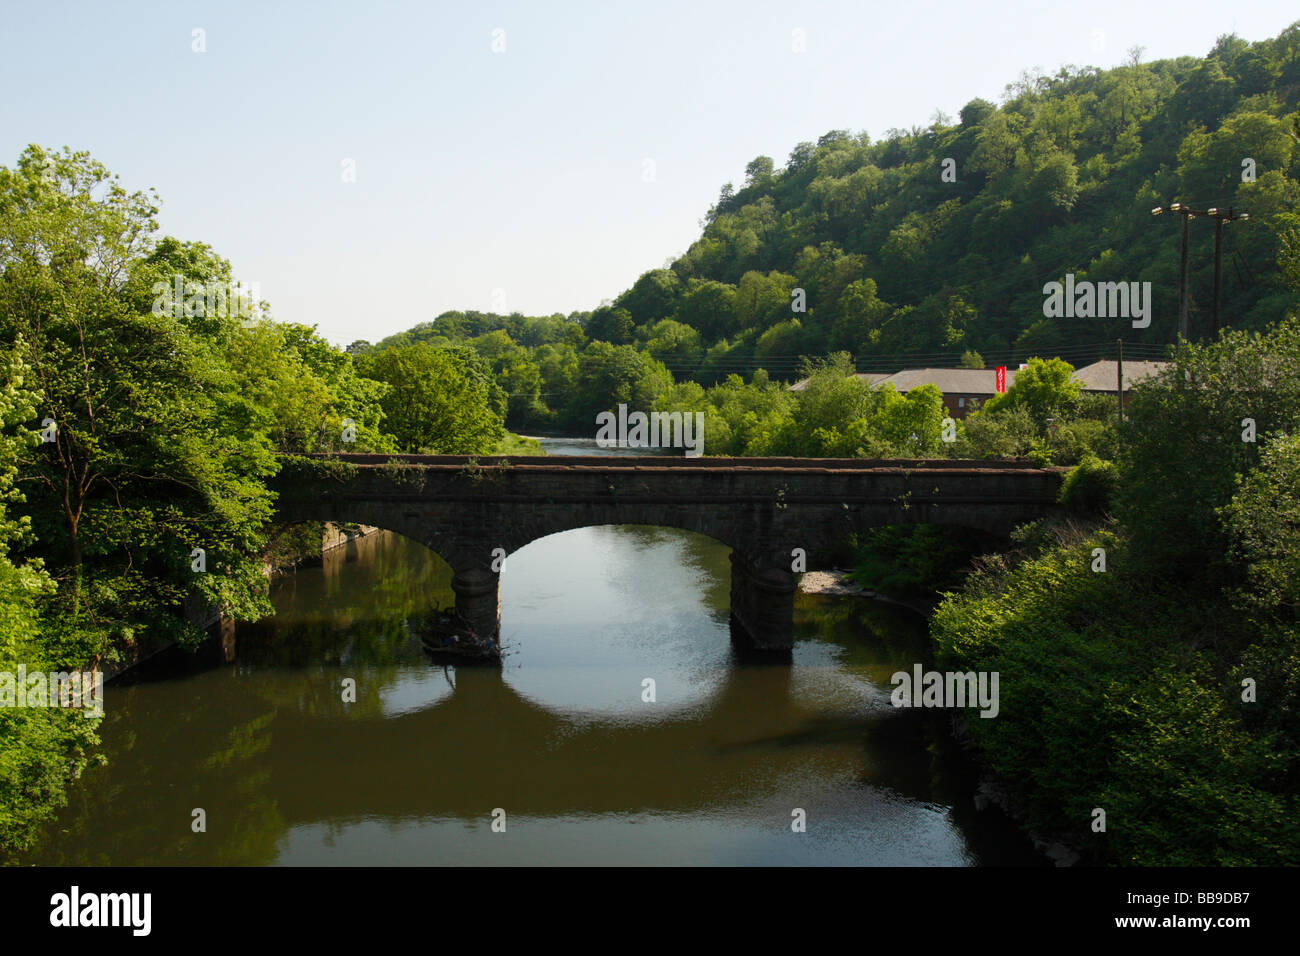 Old Bridge over The River Taff at Taff's Well near Cardiff, South Wales, U.K. Stock Photo